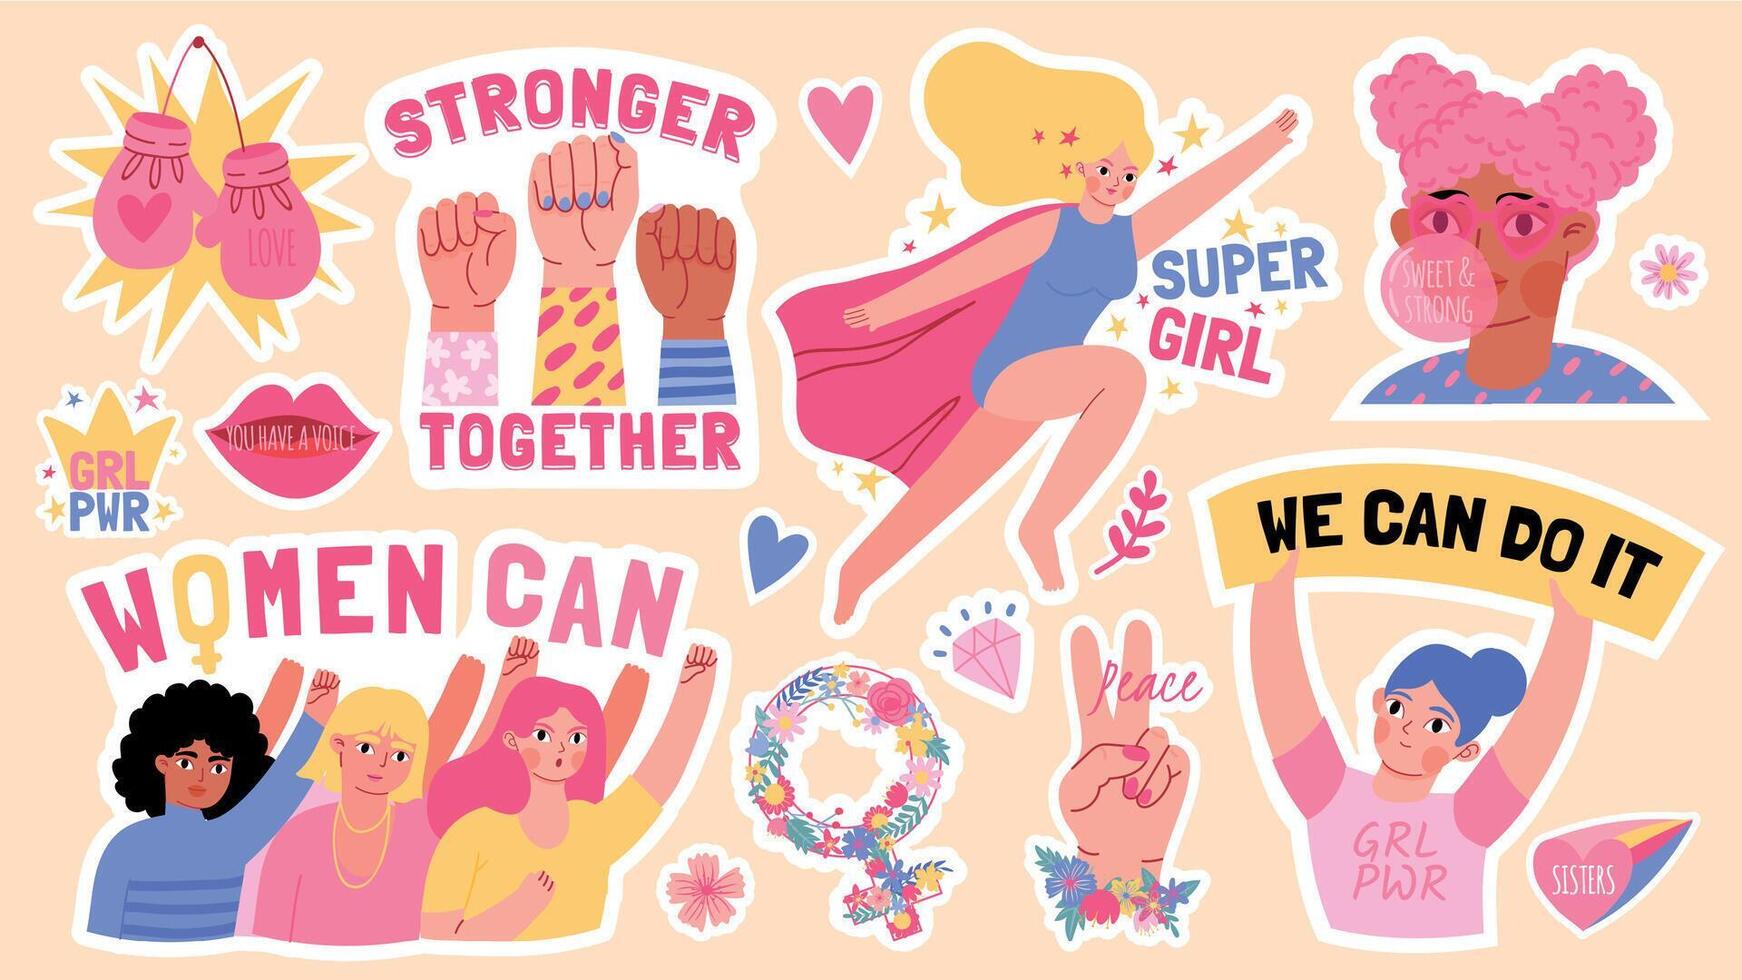 Flat girls power stickers with fists up and feminism slogans. Strong black women rights. Super girl. Feminist movement symbols vector set